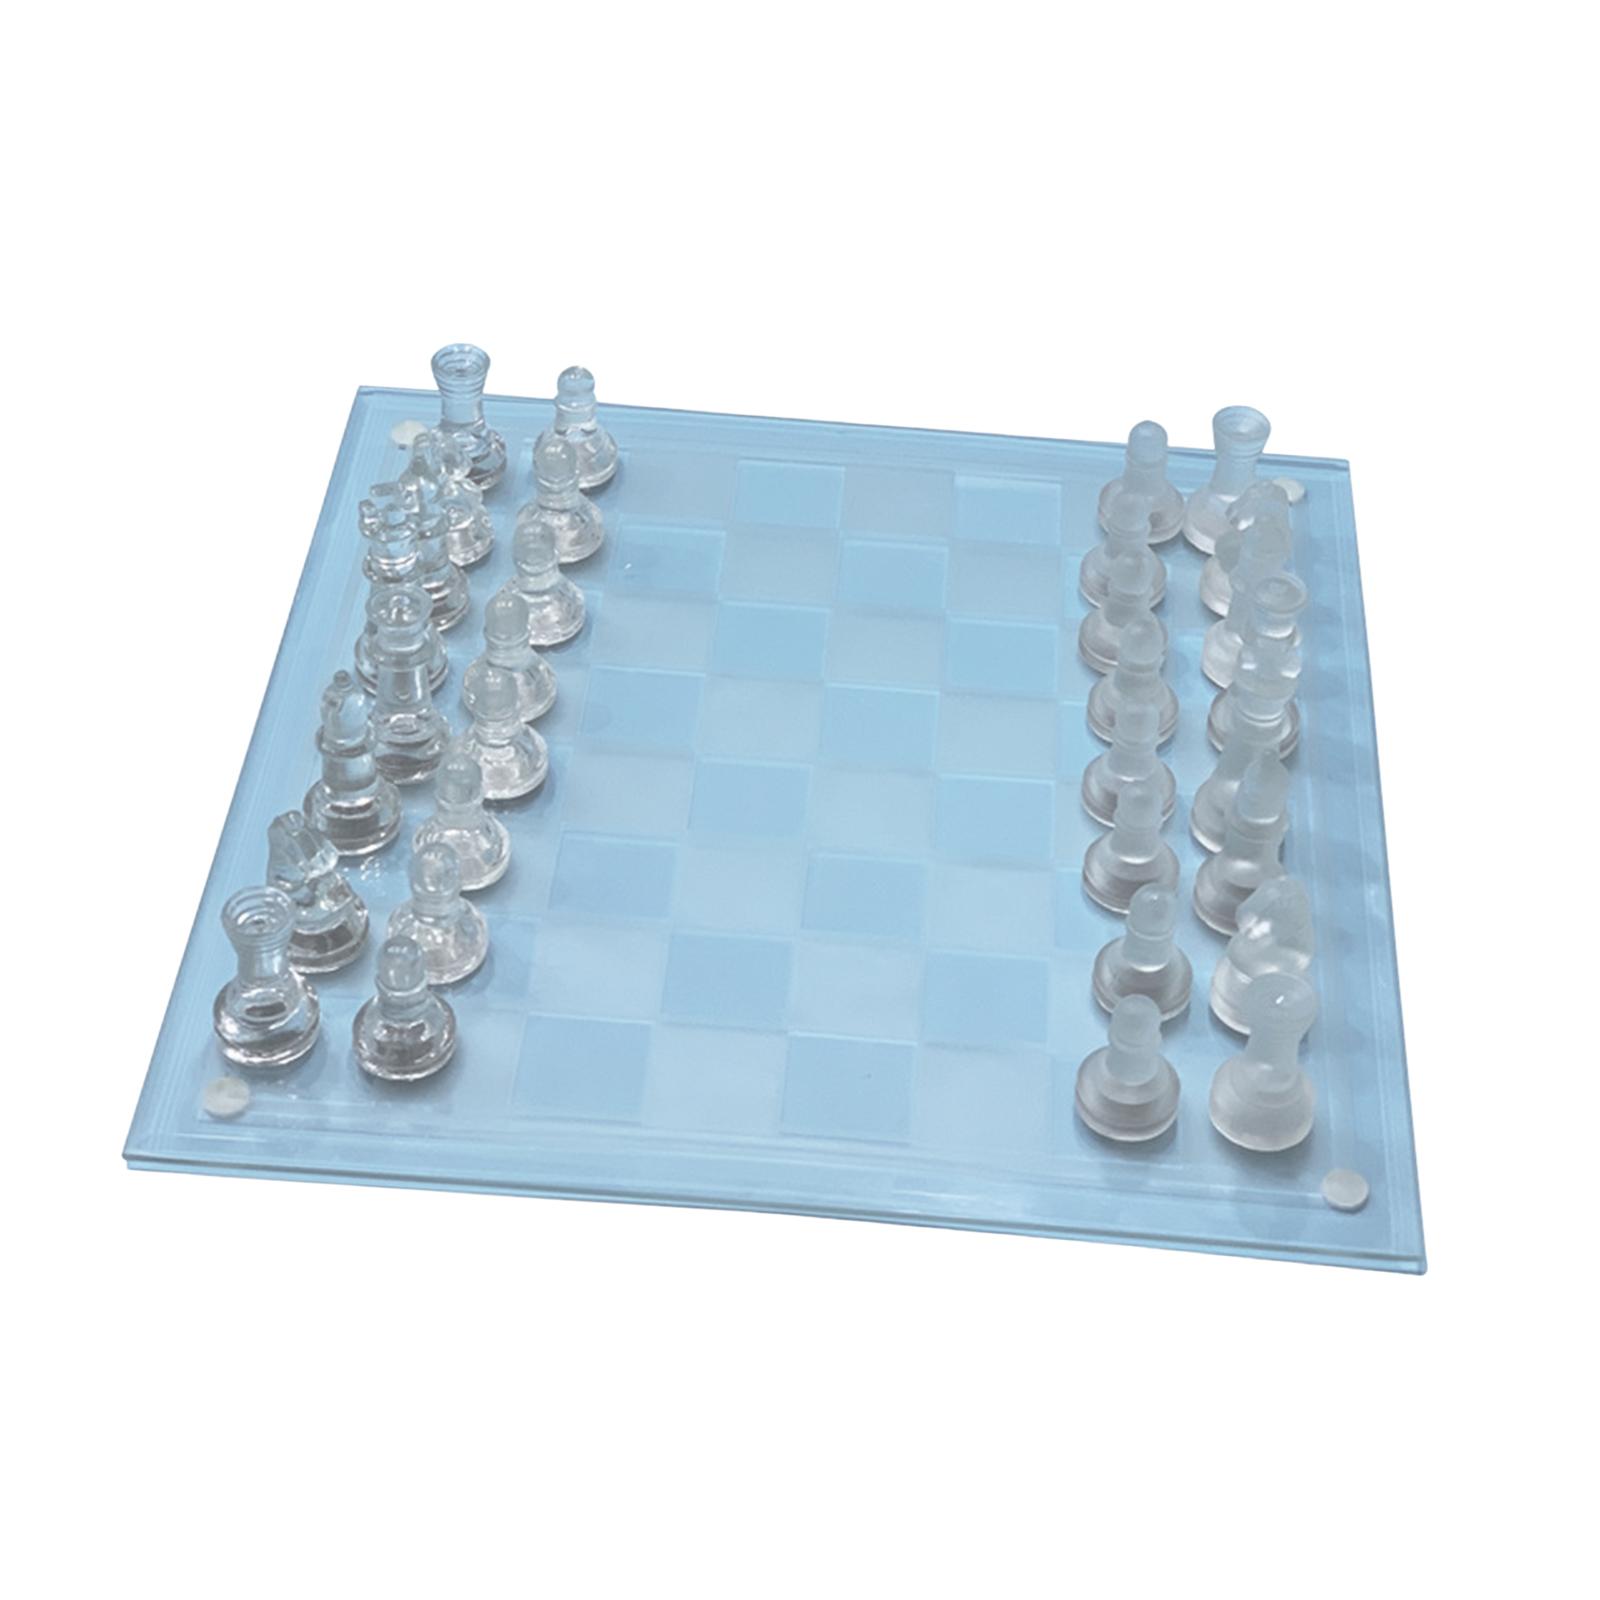 Glass Chess Game, Crystal Chess Board, Adults Play Set, Frosted Chess Board Set, Classic Strategy Game for Party, Interaction Activity Festival - image 3 of 8